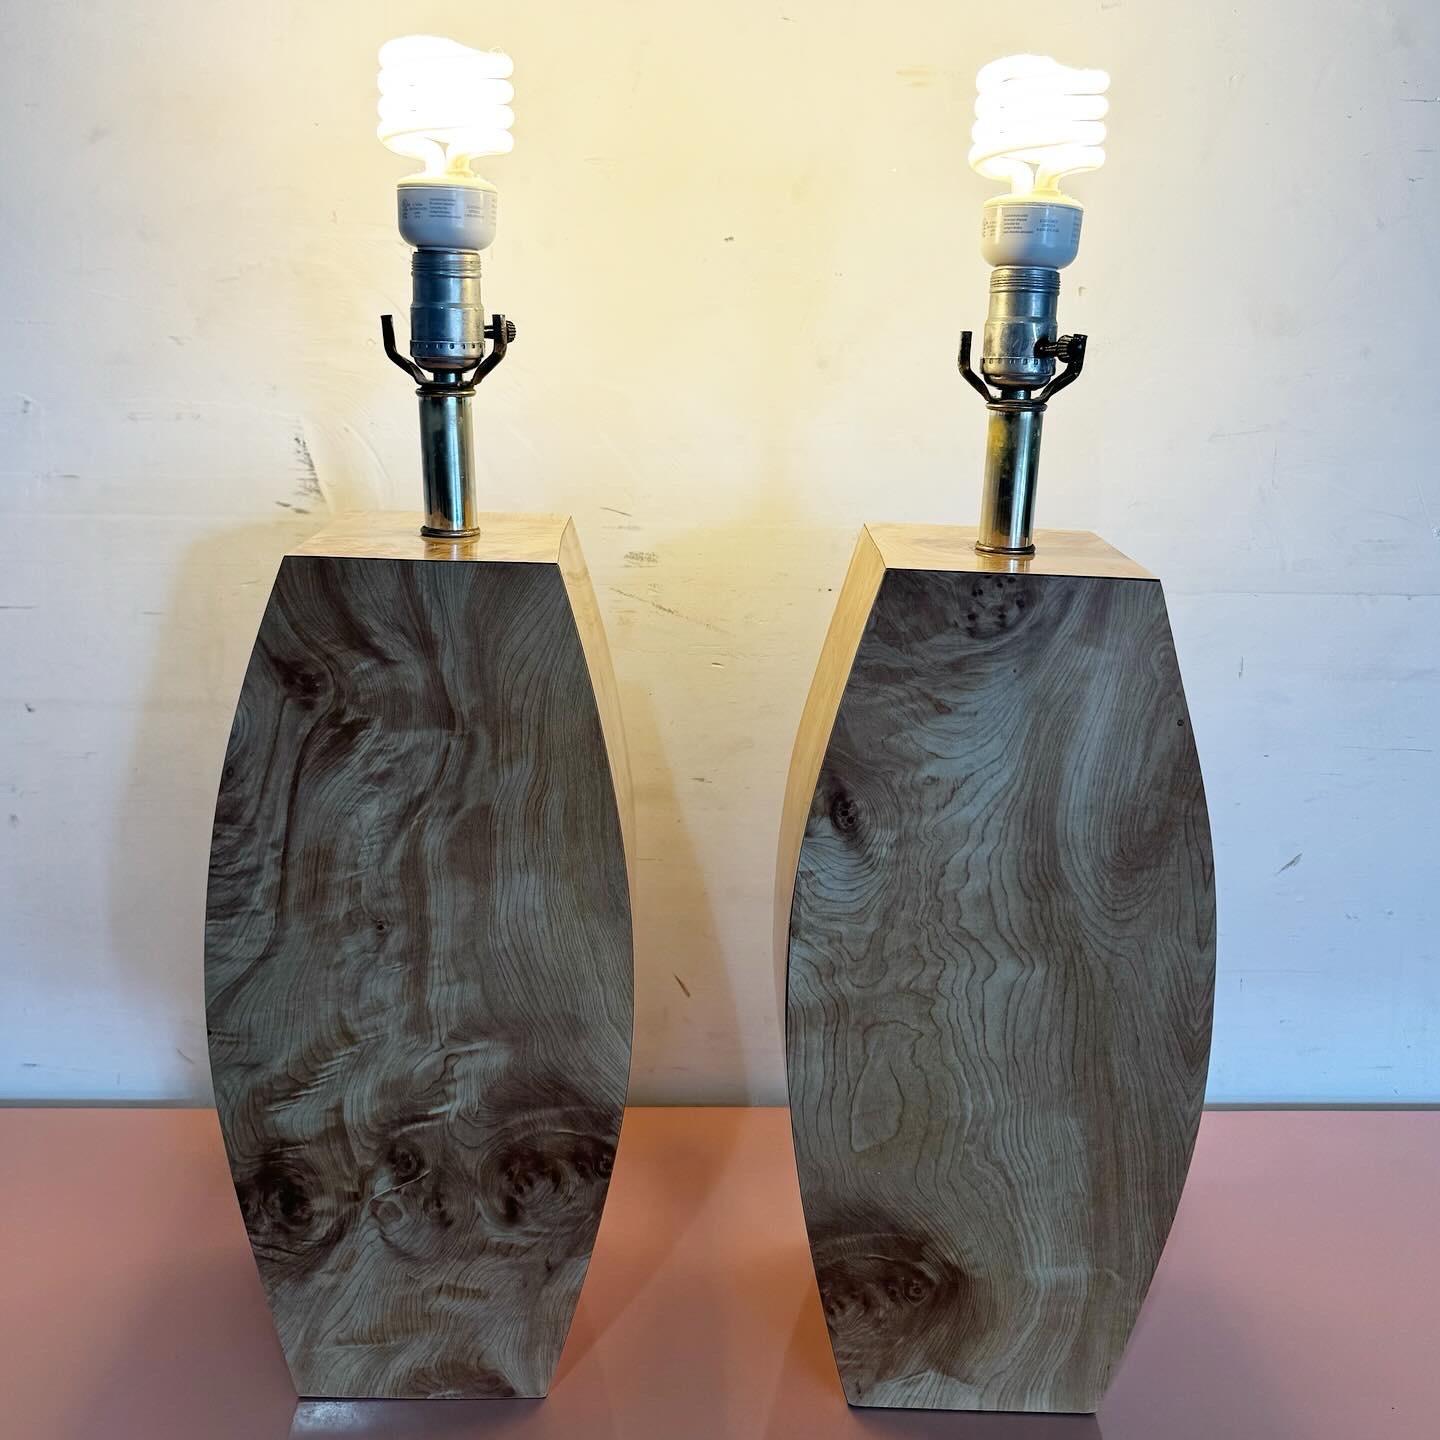 Postmodern Burl Wood Laminate Table Lamps - a Pair For Sale 5